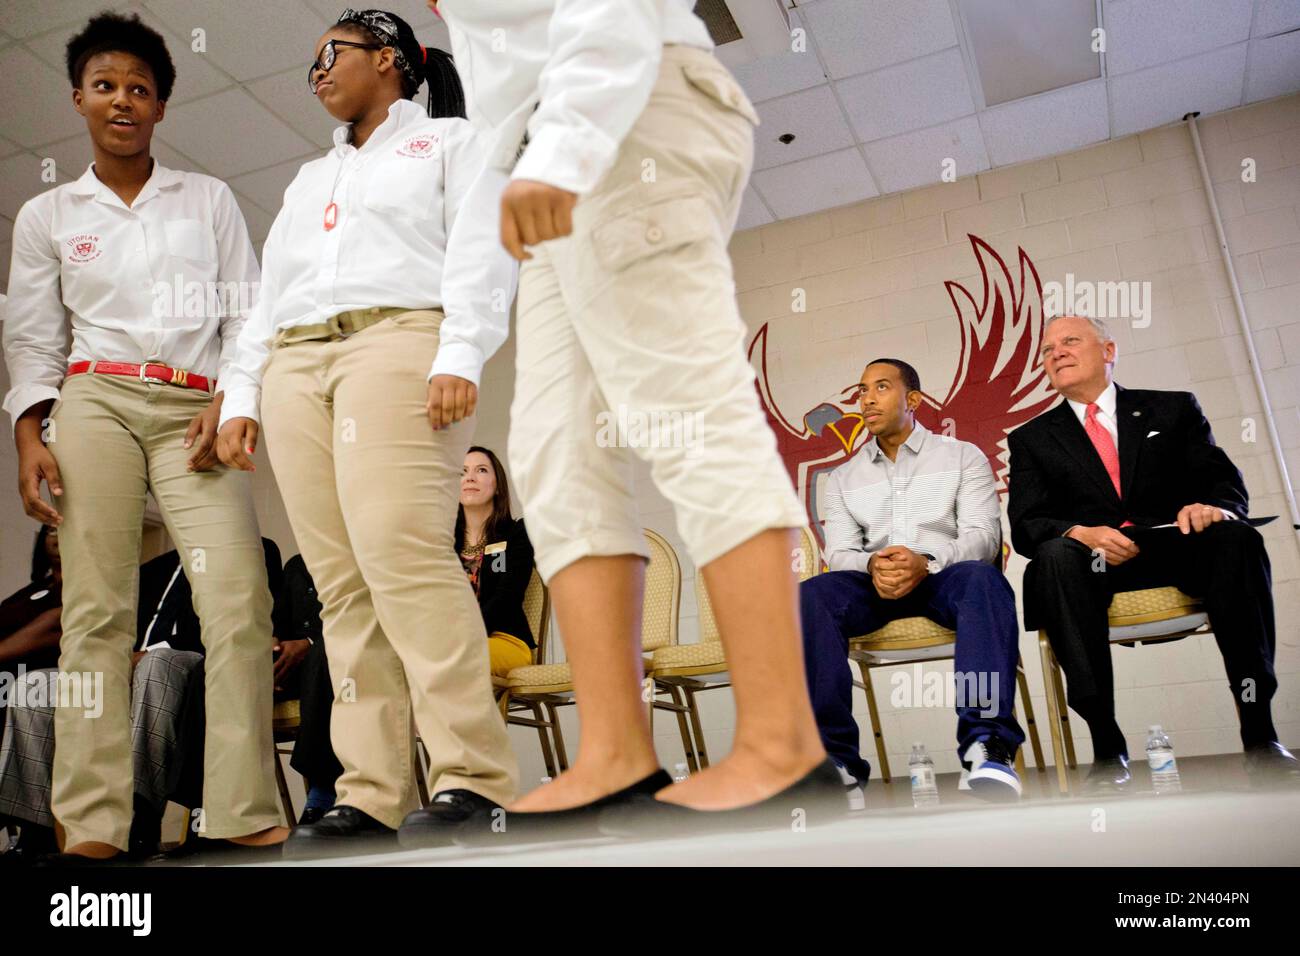 Rapper Ludacris, rear left, and Georgia Gov. Nathan Deal watch a skit performed by charter school students at Utopian Academy for the Arts, Friday, Sept. 26, 2014, in Riverdale, Ga. Deal and Ludacris may seem like an odd pairing for a campaign event, but the duo was a hit with a cheering crowd of students Friday. Christopher "Ludacris" Bridges has been an outspoken supporter of President Barack Obama, penning a profane song during the 2008 campaign criticizing his opponents. But Deal says he couldn't think of anyone better to inspire students at the event. (AP Photo/David Goldman) Stock Photo